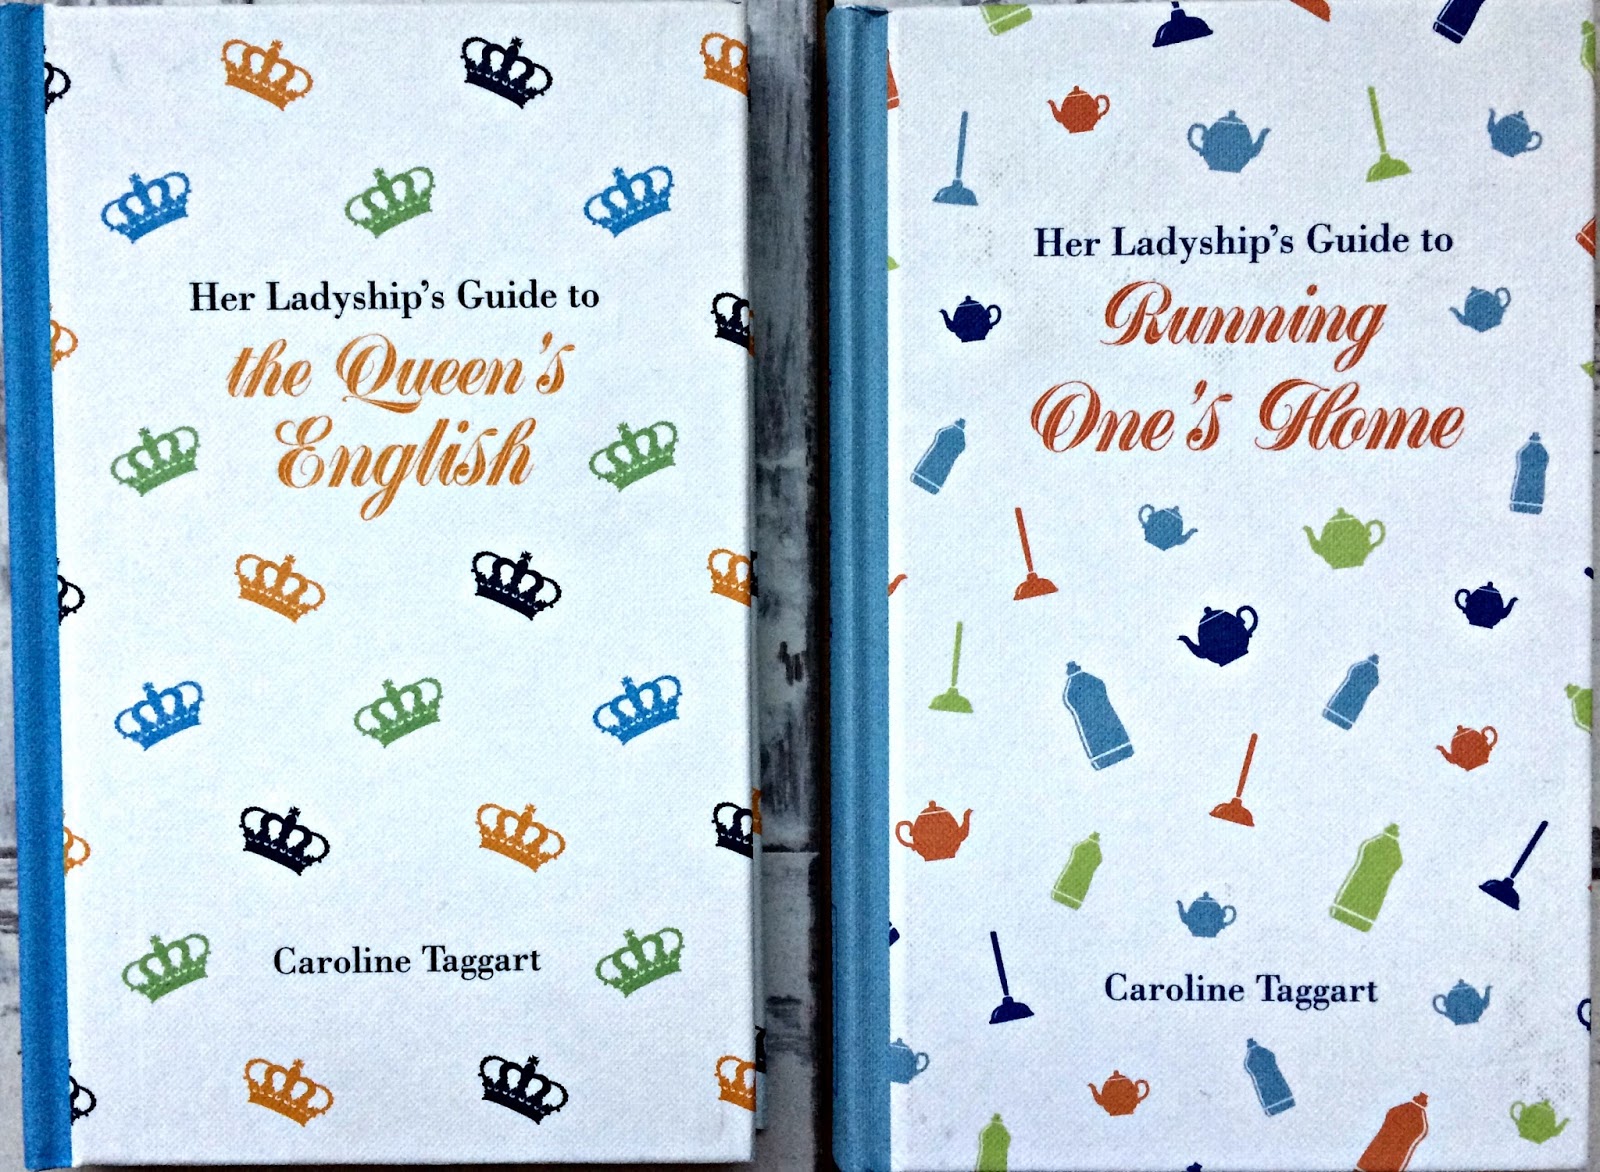 Her Ladyship's Guides:  The Queen's English & Running One's Home